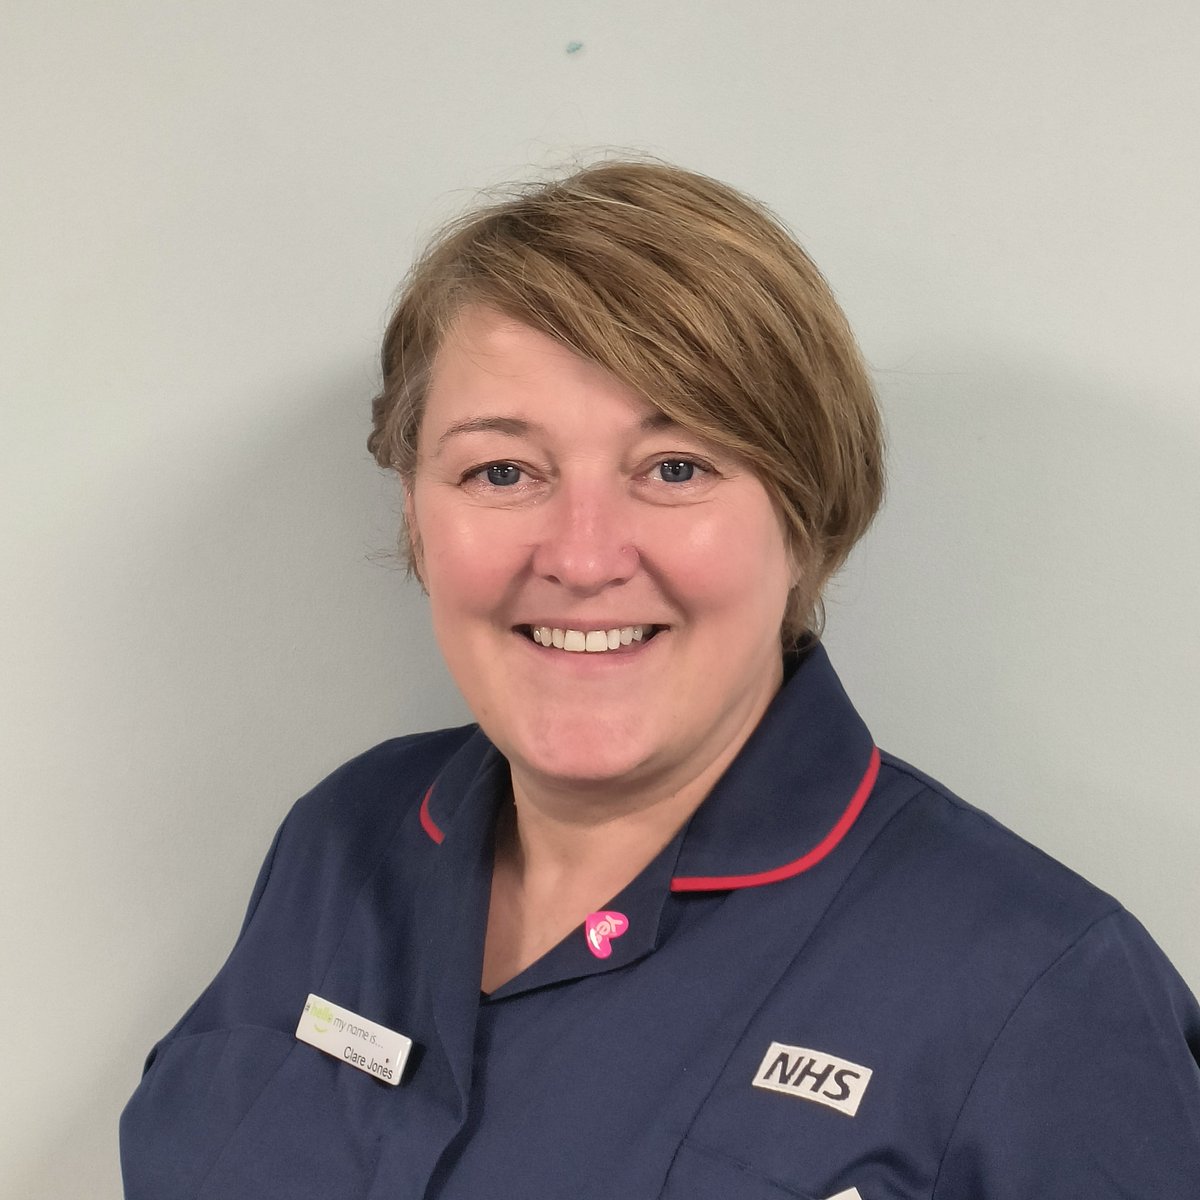 And finally, Clare Jones is our Organ and Tissue Donation and Transplantation Chief Nurse Fellow. Clare works as an organ donation team manager in Yorkshire. Her fellowship is focusing on improving the tissue donation pathway.